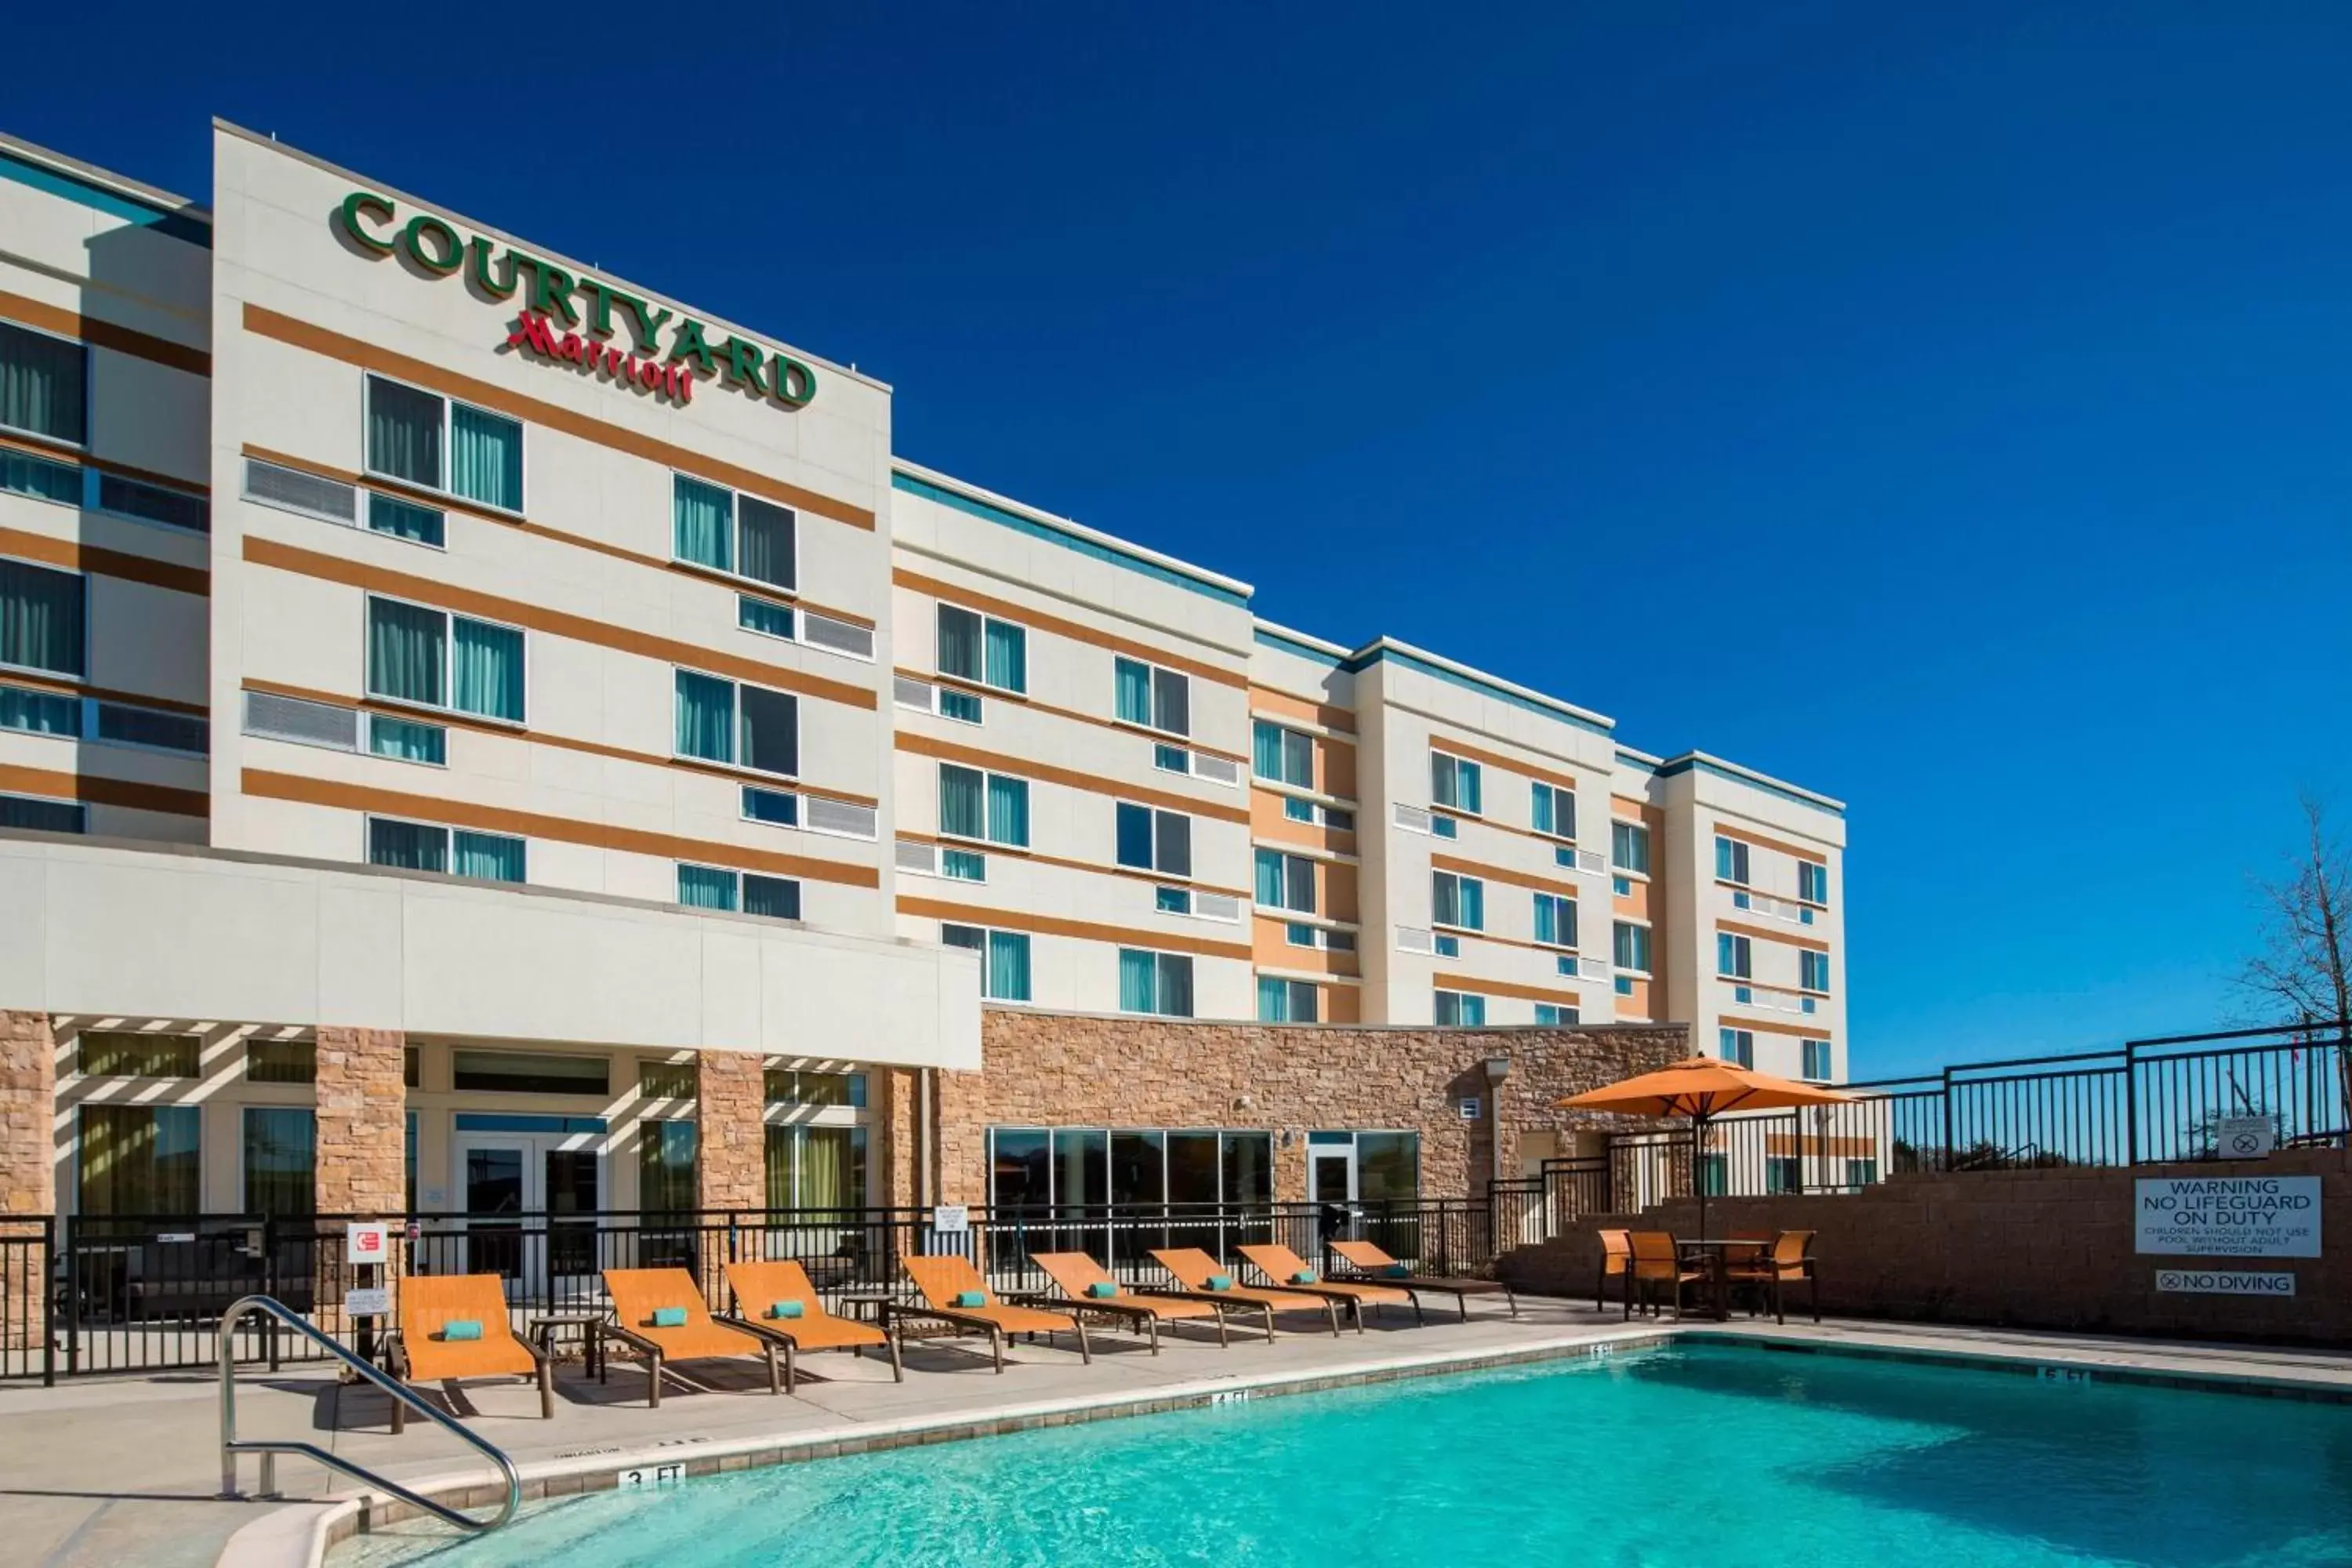 Swimming pool, Property Building in Courtyard by Marriott Dallas Midlothian at Midlothian Conference Center